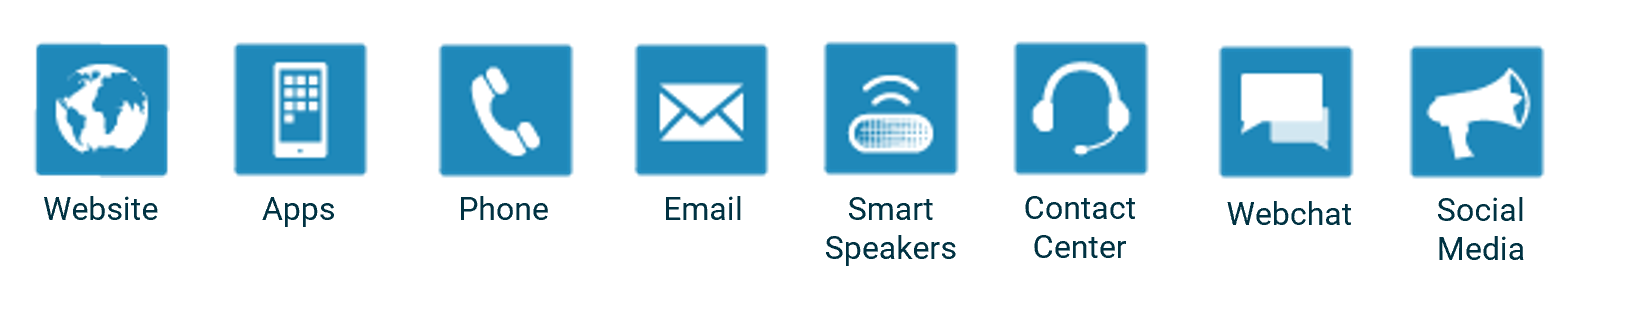 omnichannel icons: phone, web, video, smartspeaker, contact center, email, social media, etc.